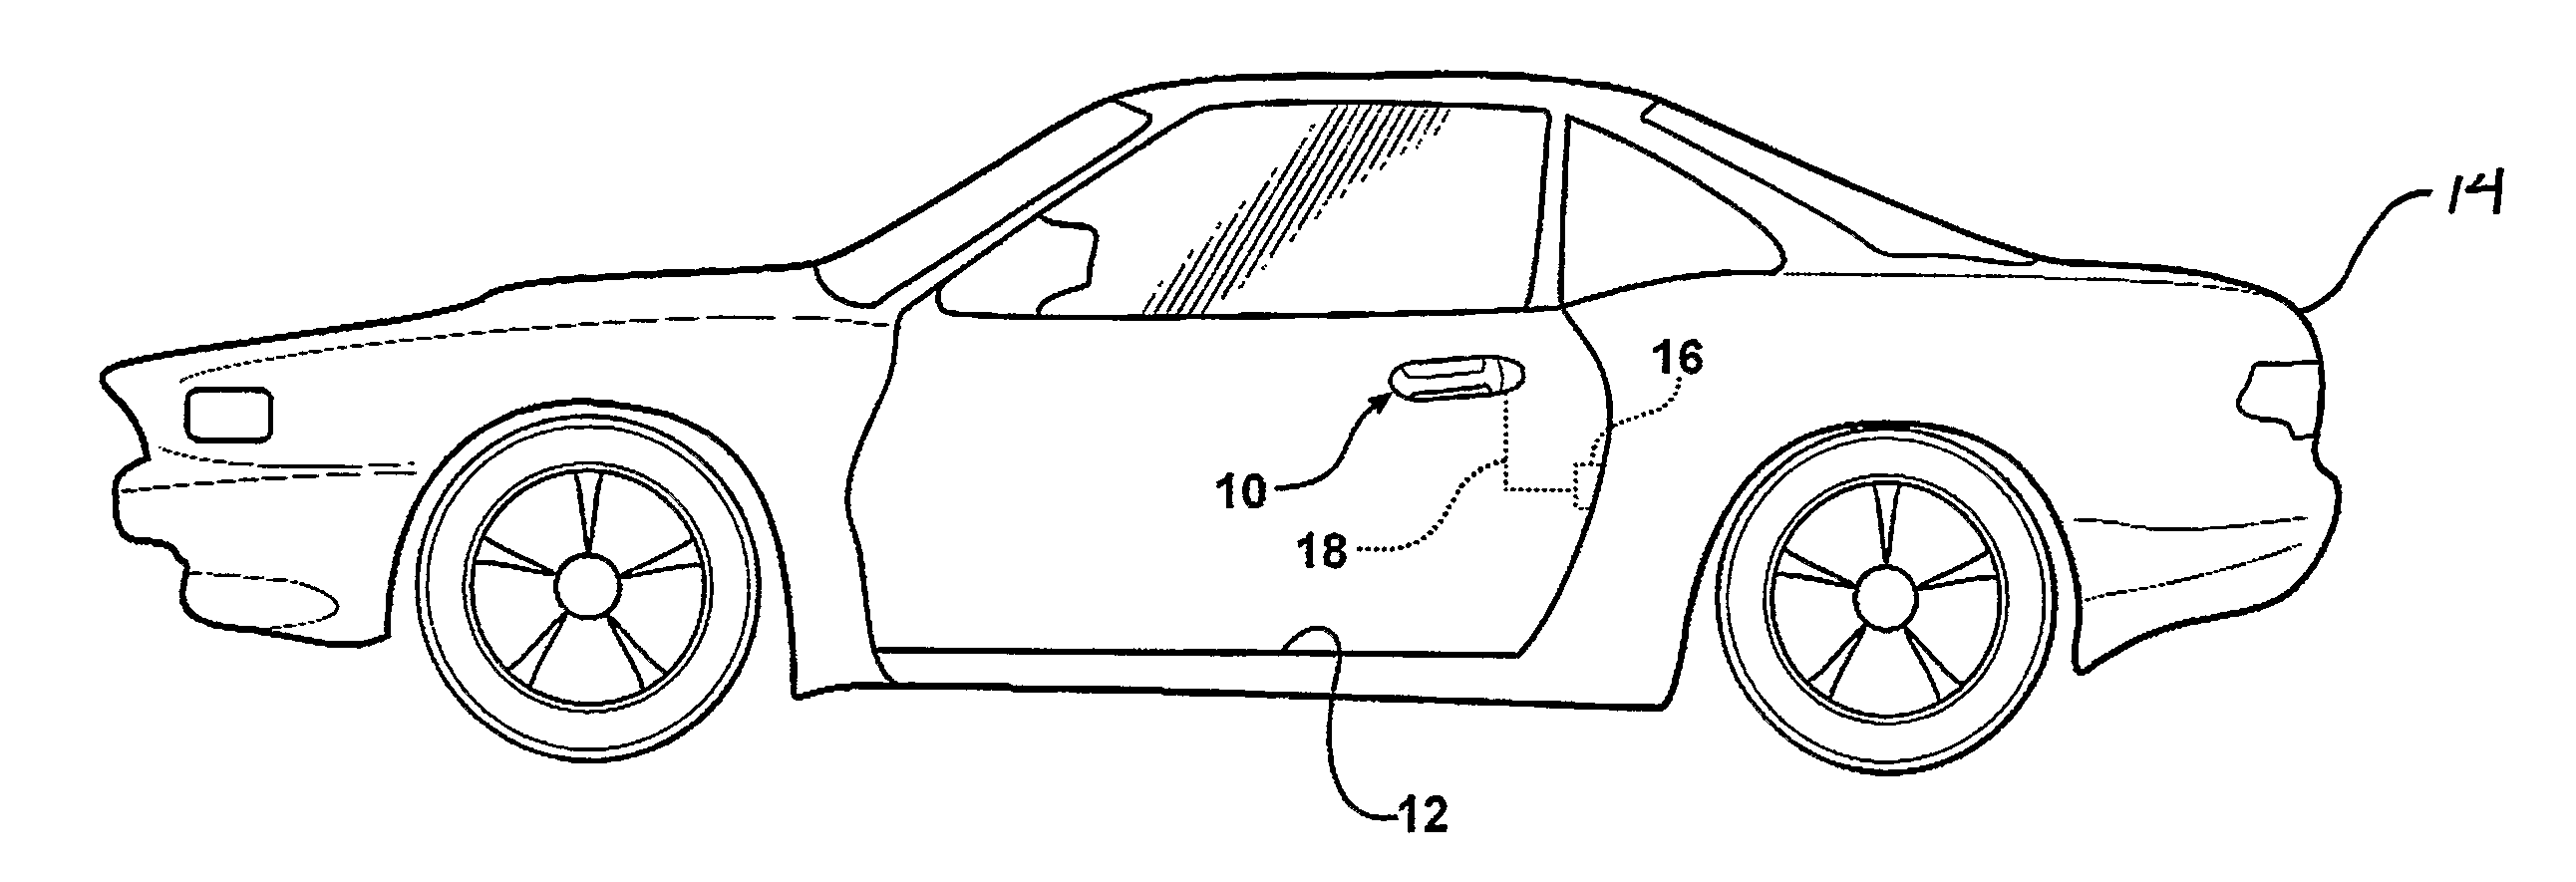 Rotary locking mechanism for outside vehicle door handle